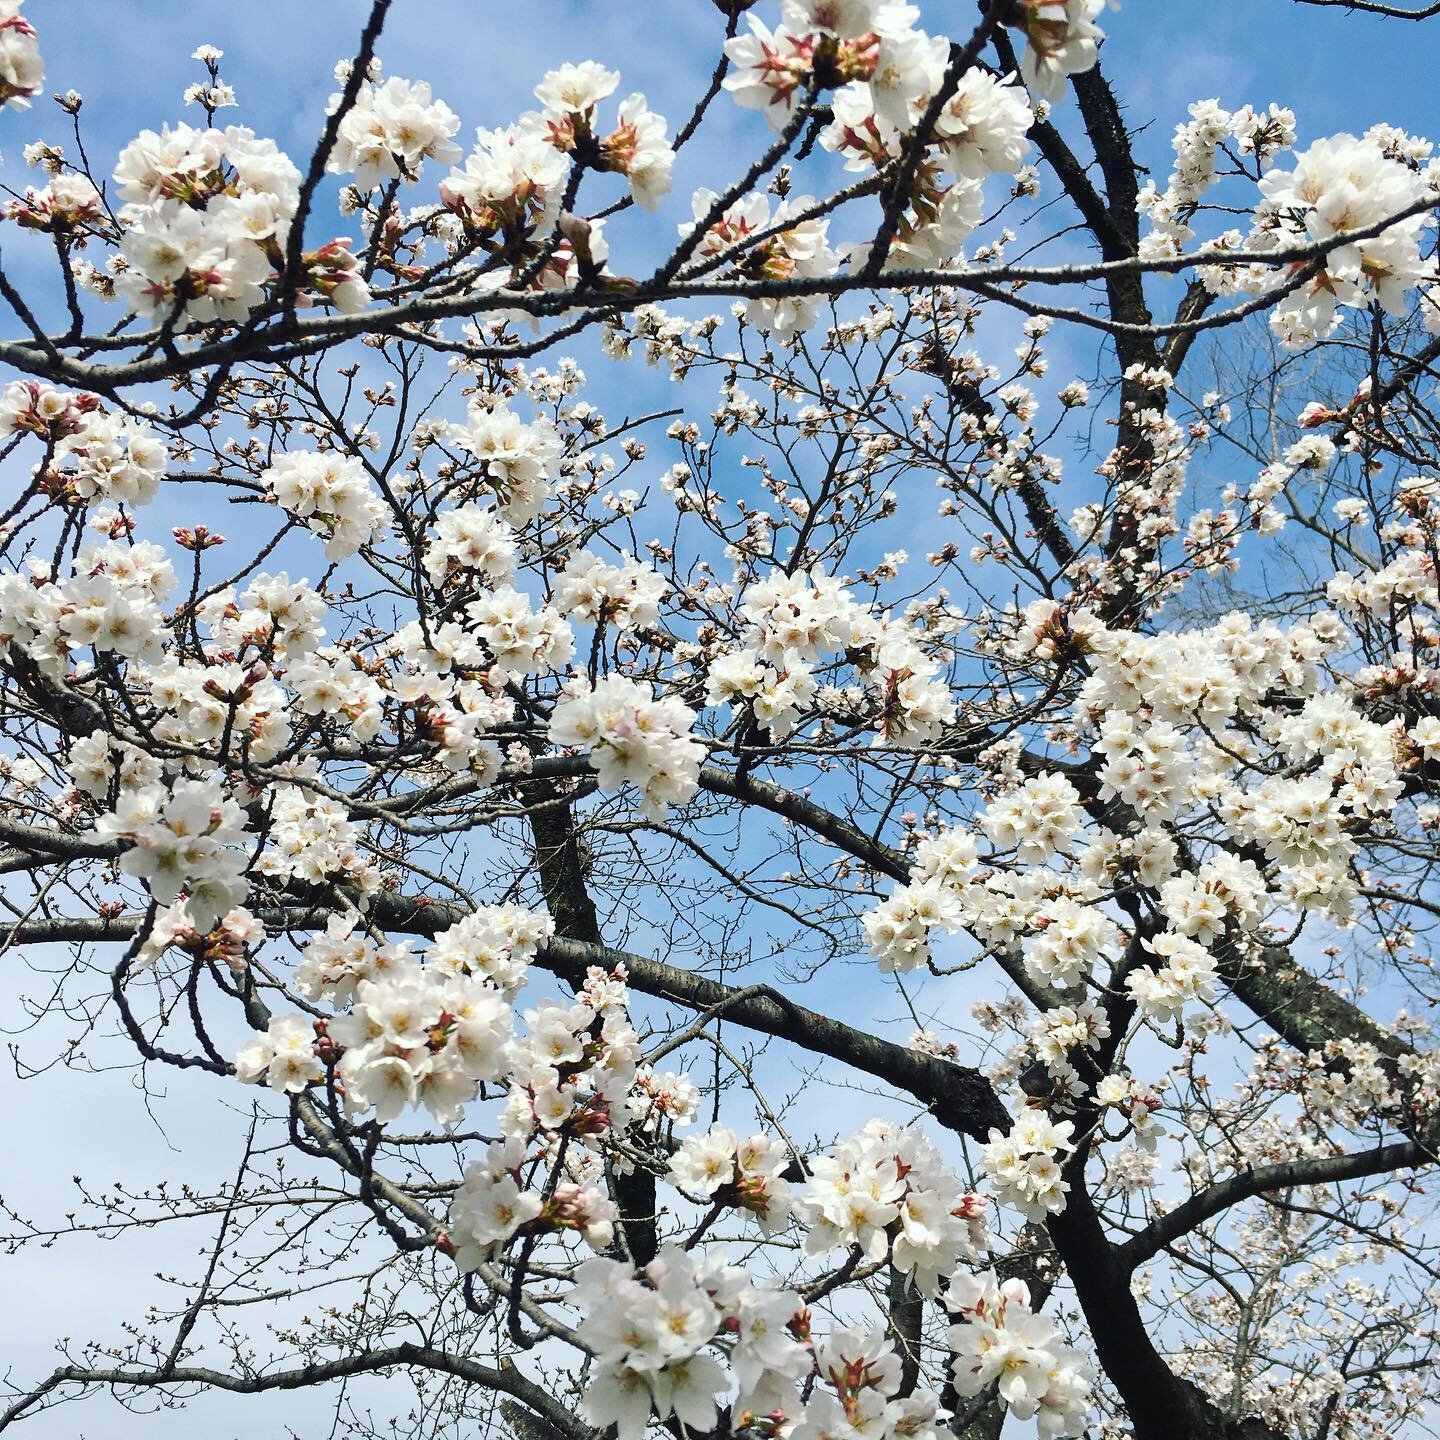 First cherry blossom have bloomed in #kyoto .

A year has passed by since I had returned to Japan from London. I clearly remember it was a strange season that cherry blossams are covered with snow in last spring in Tokyo.

Now I see same cherry bloss